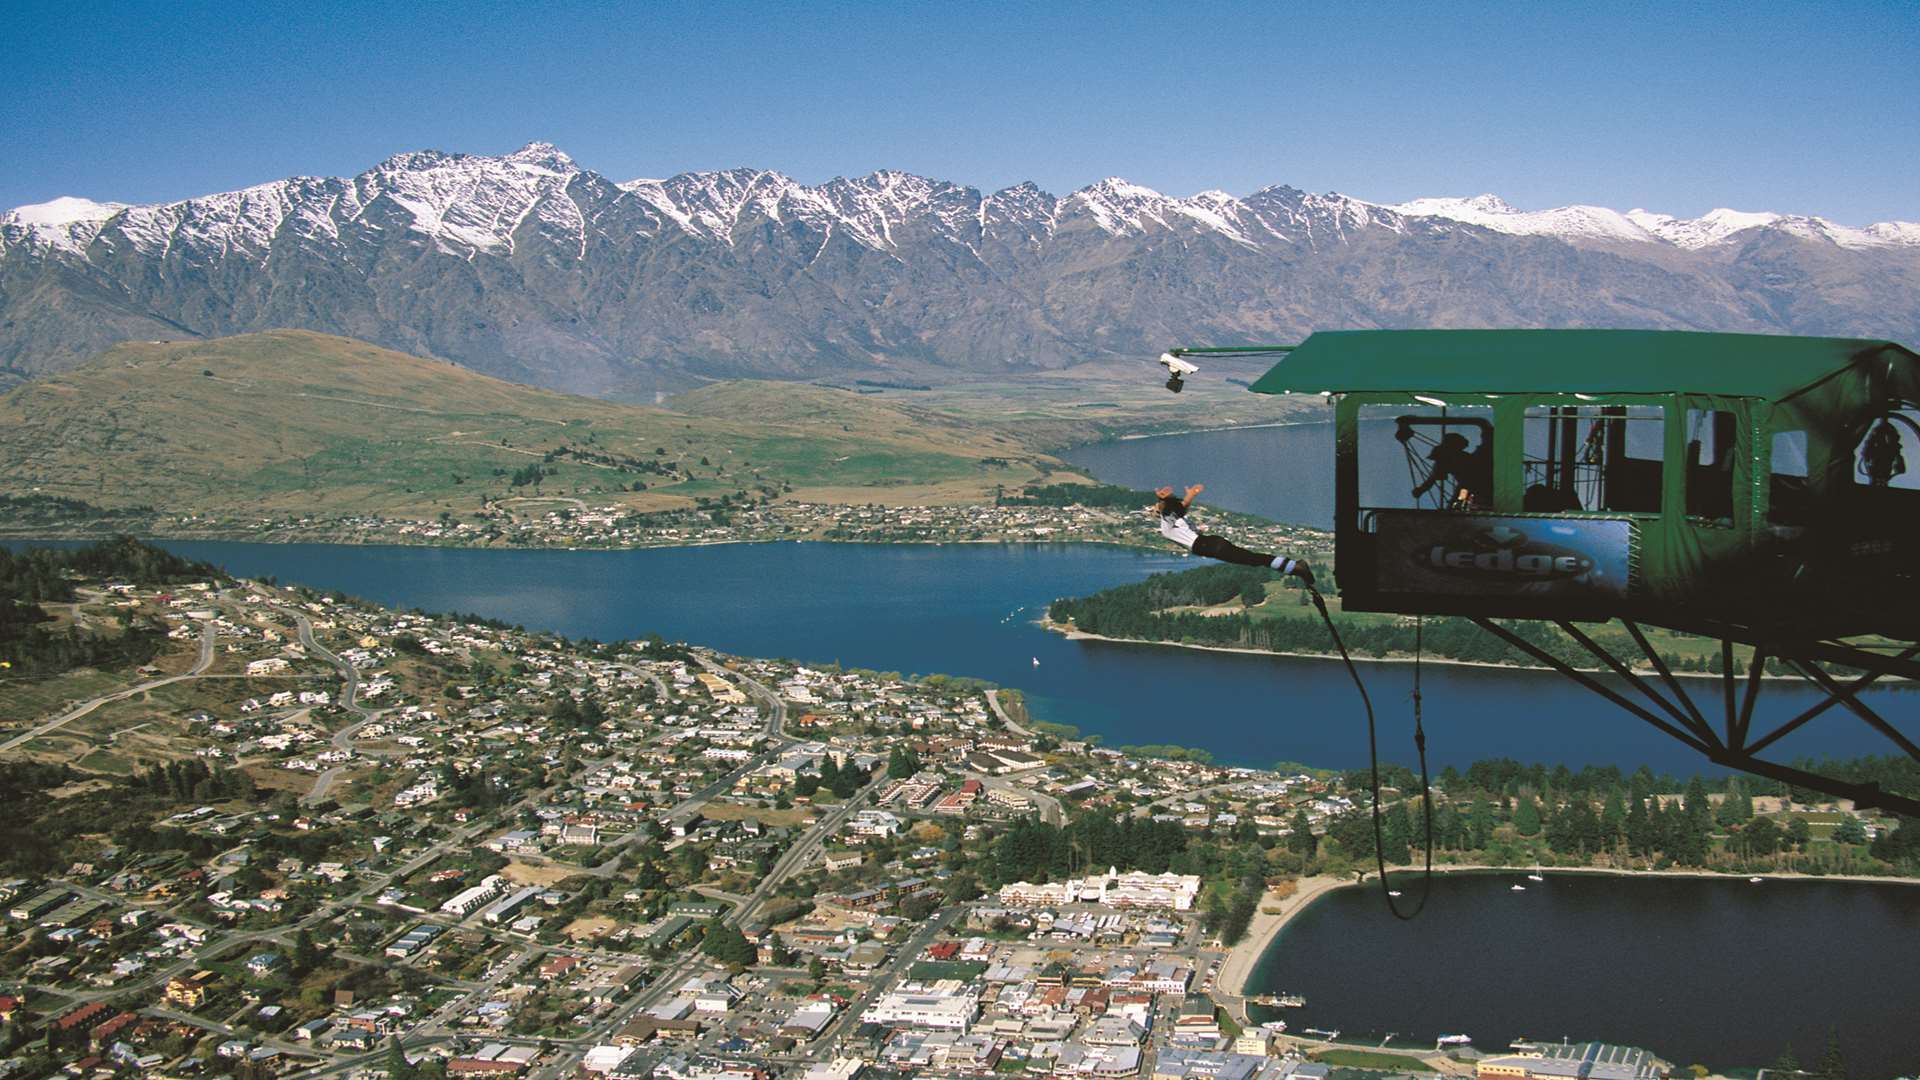 Lee busked in picturesque Queenstown. Picture: AJ Hackett Bungy Ltd